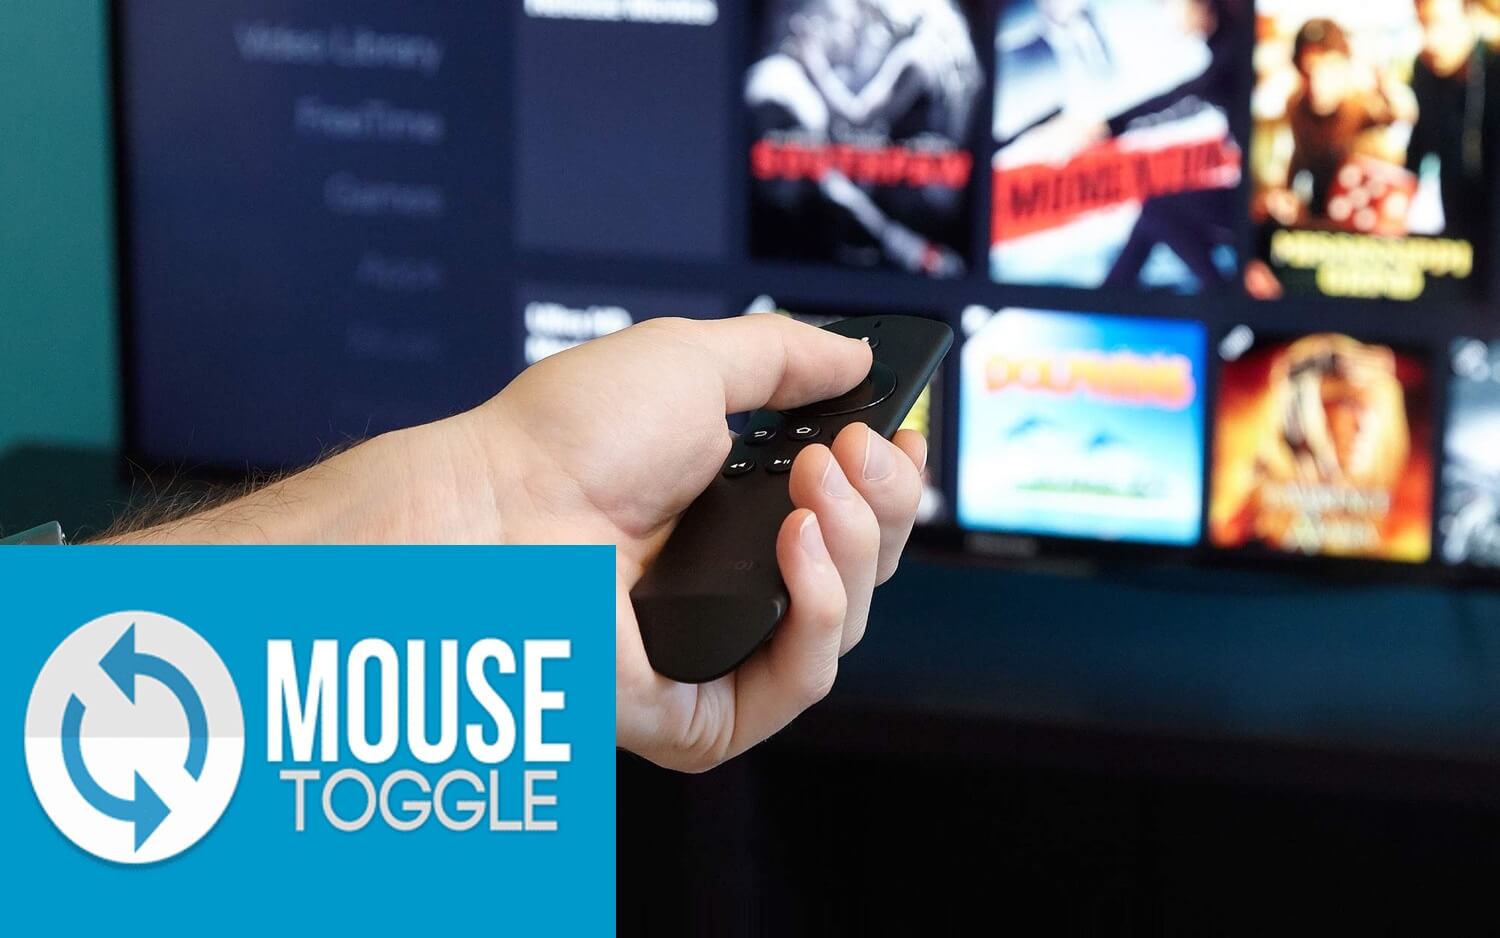 Mouse Toggle for Firestick: How to Install & Use on any App